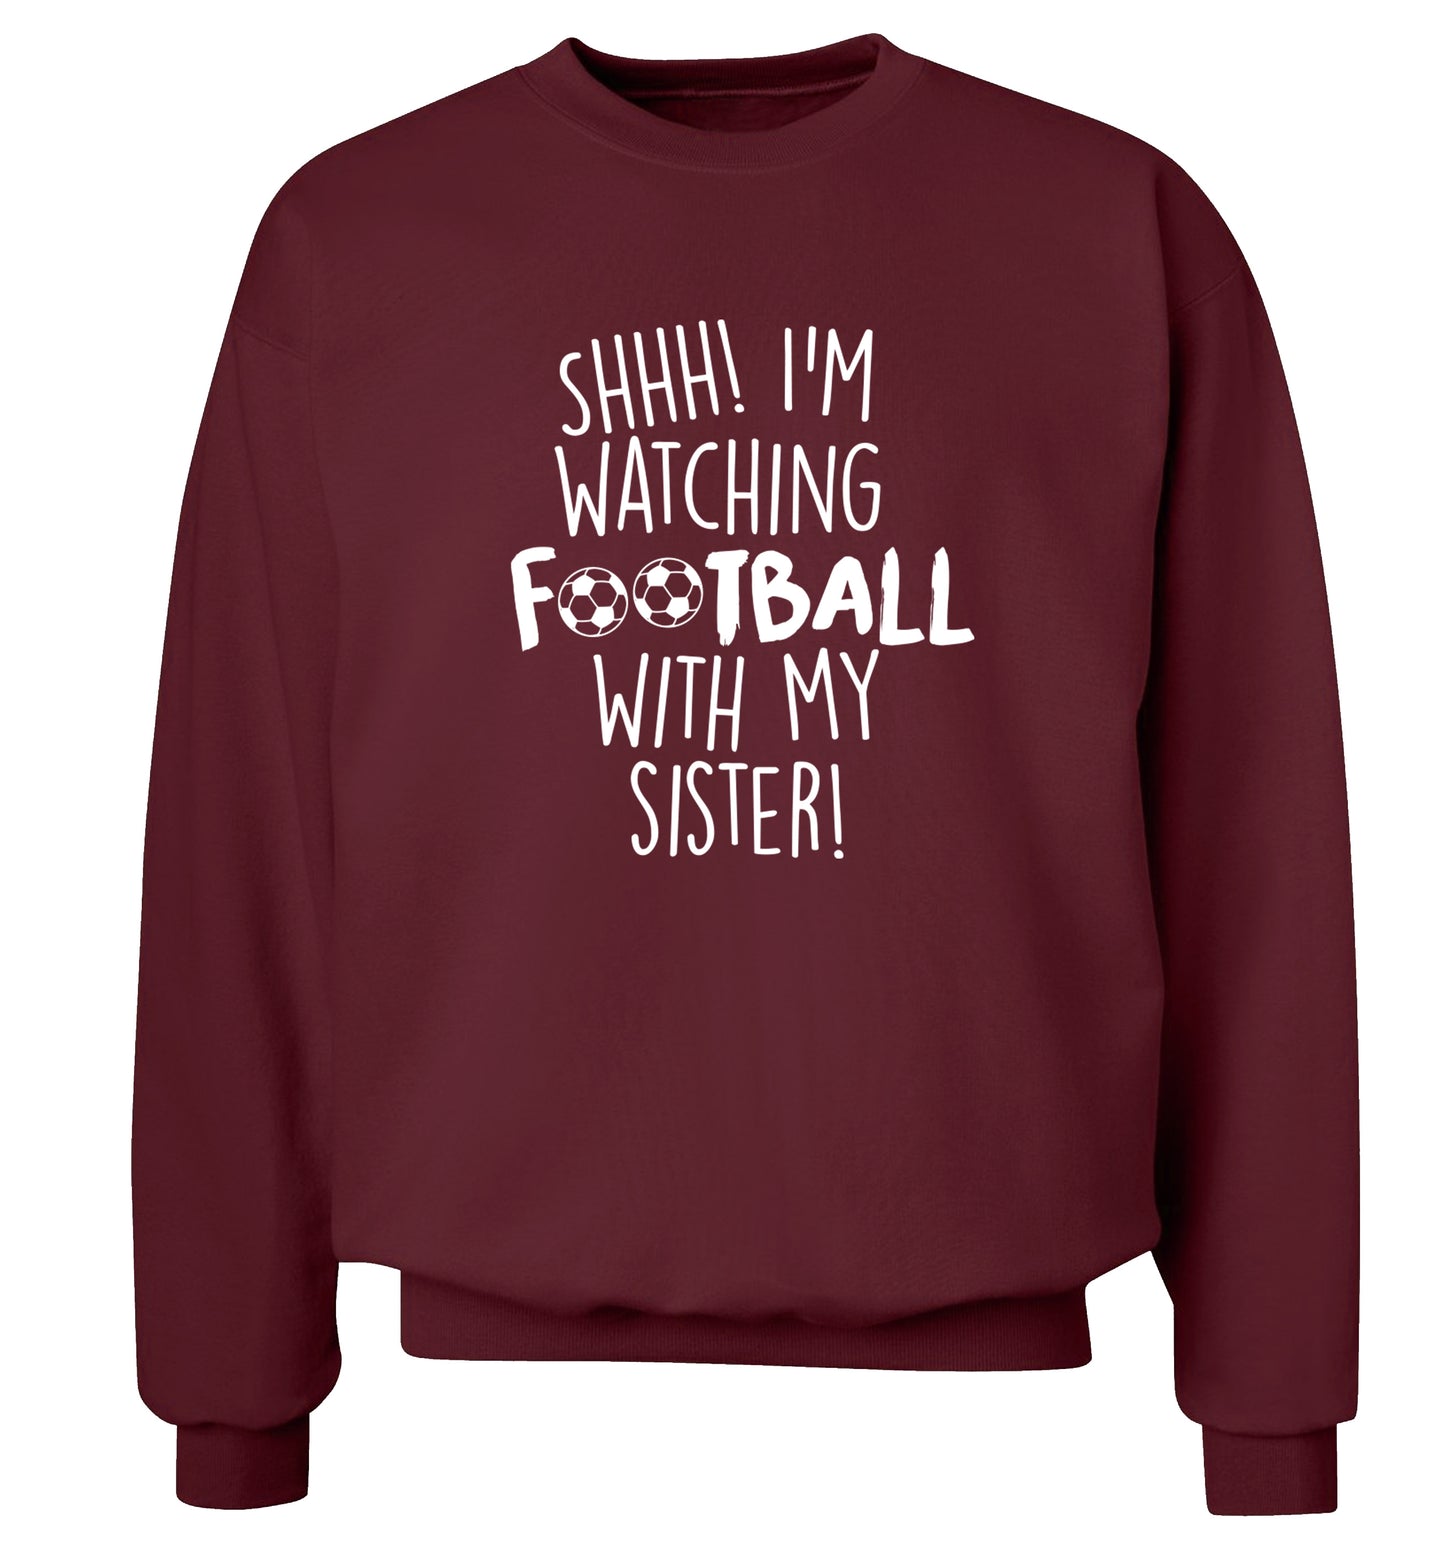 Shhh I'm watching football with my sister Adult's unisexmaroon Sweater 2XL